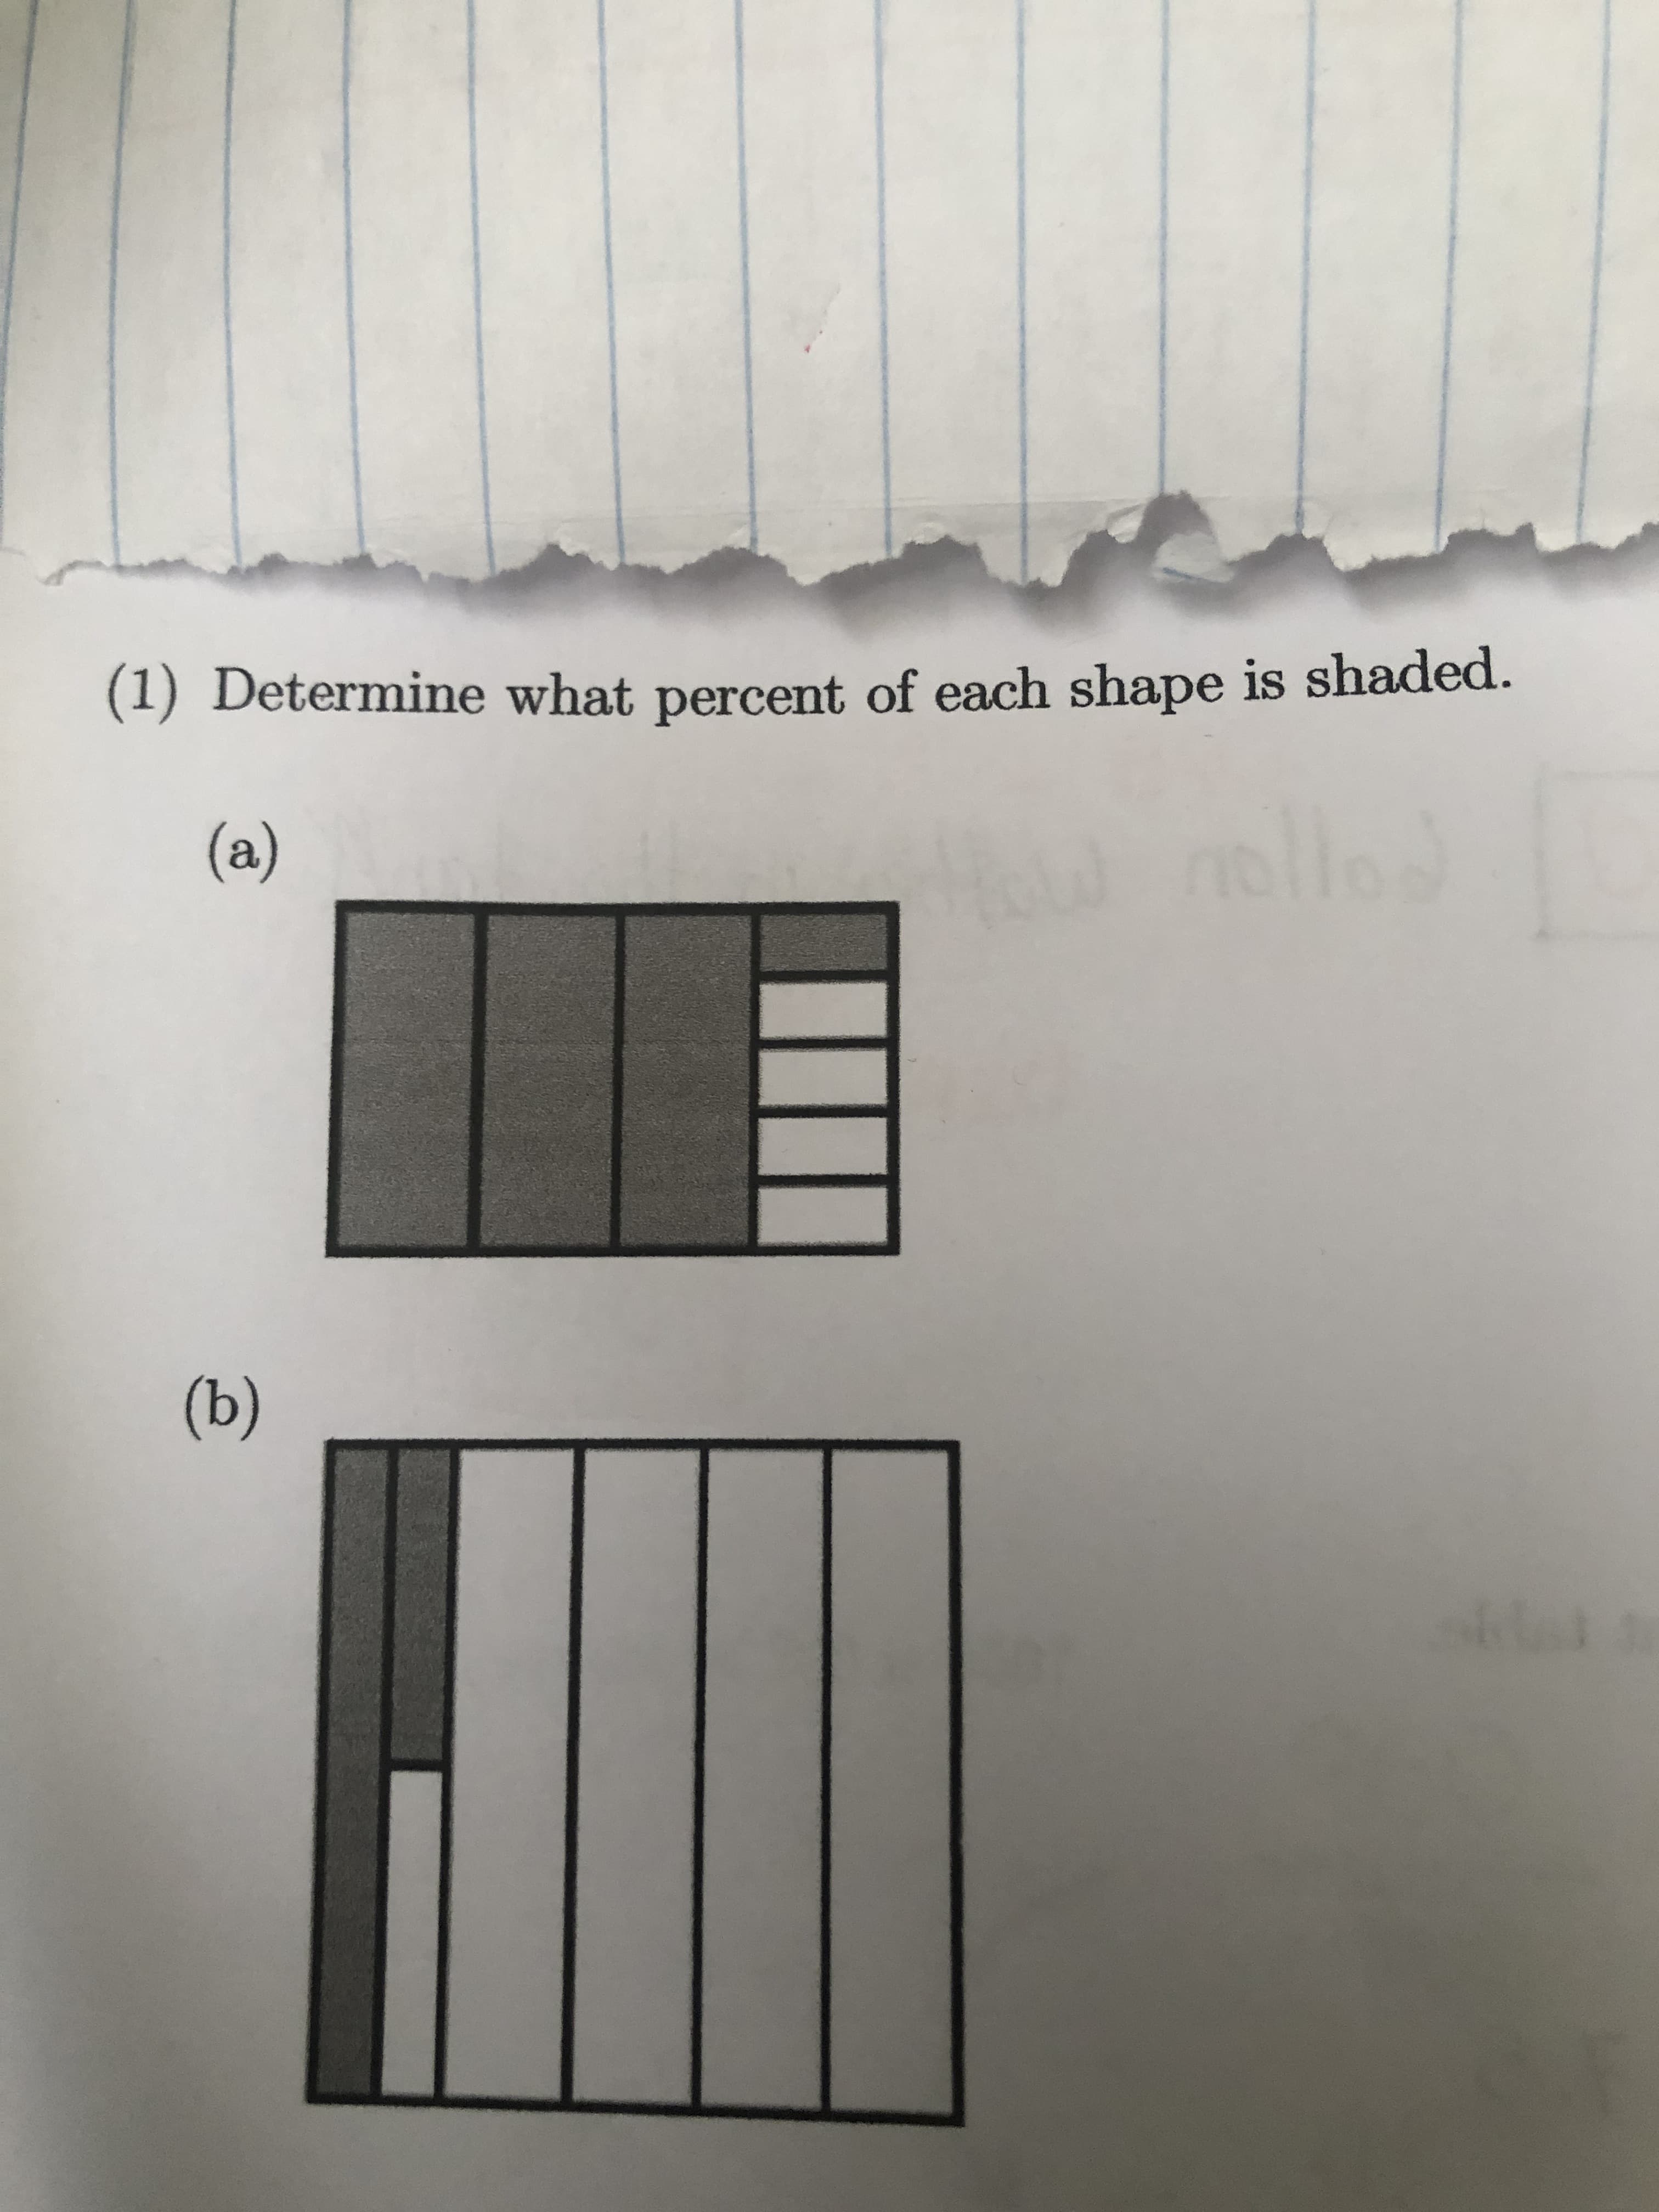 (a)
(a)
(1) Determine what percent of each shape is shaded.
